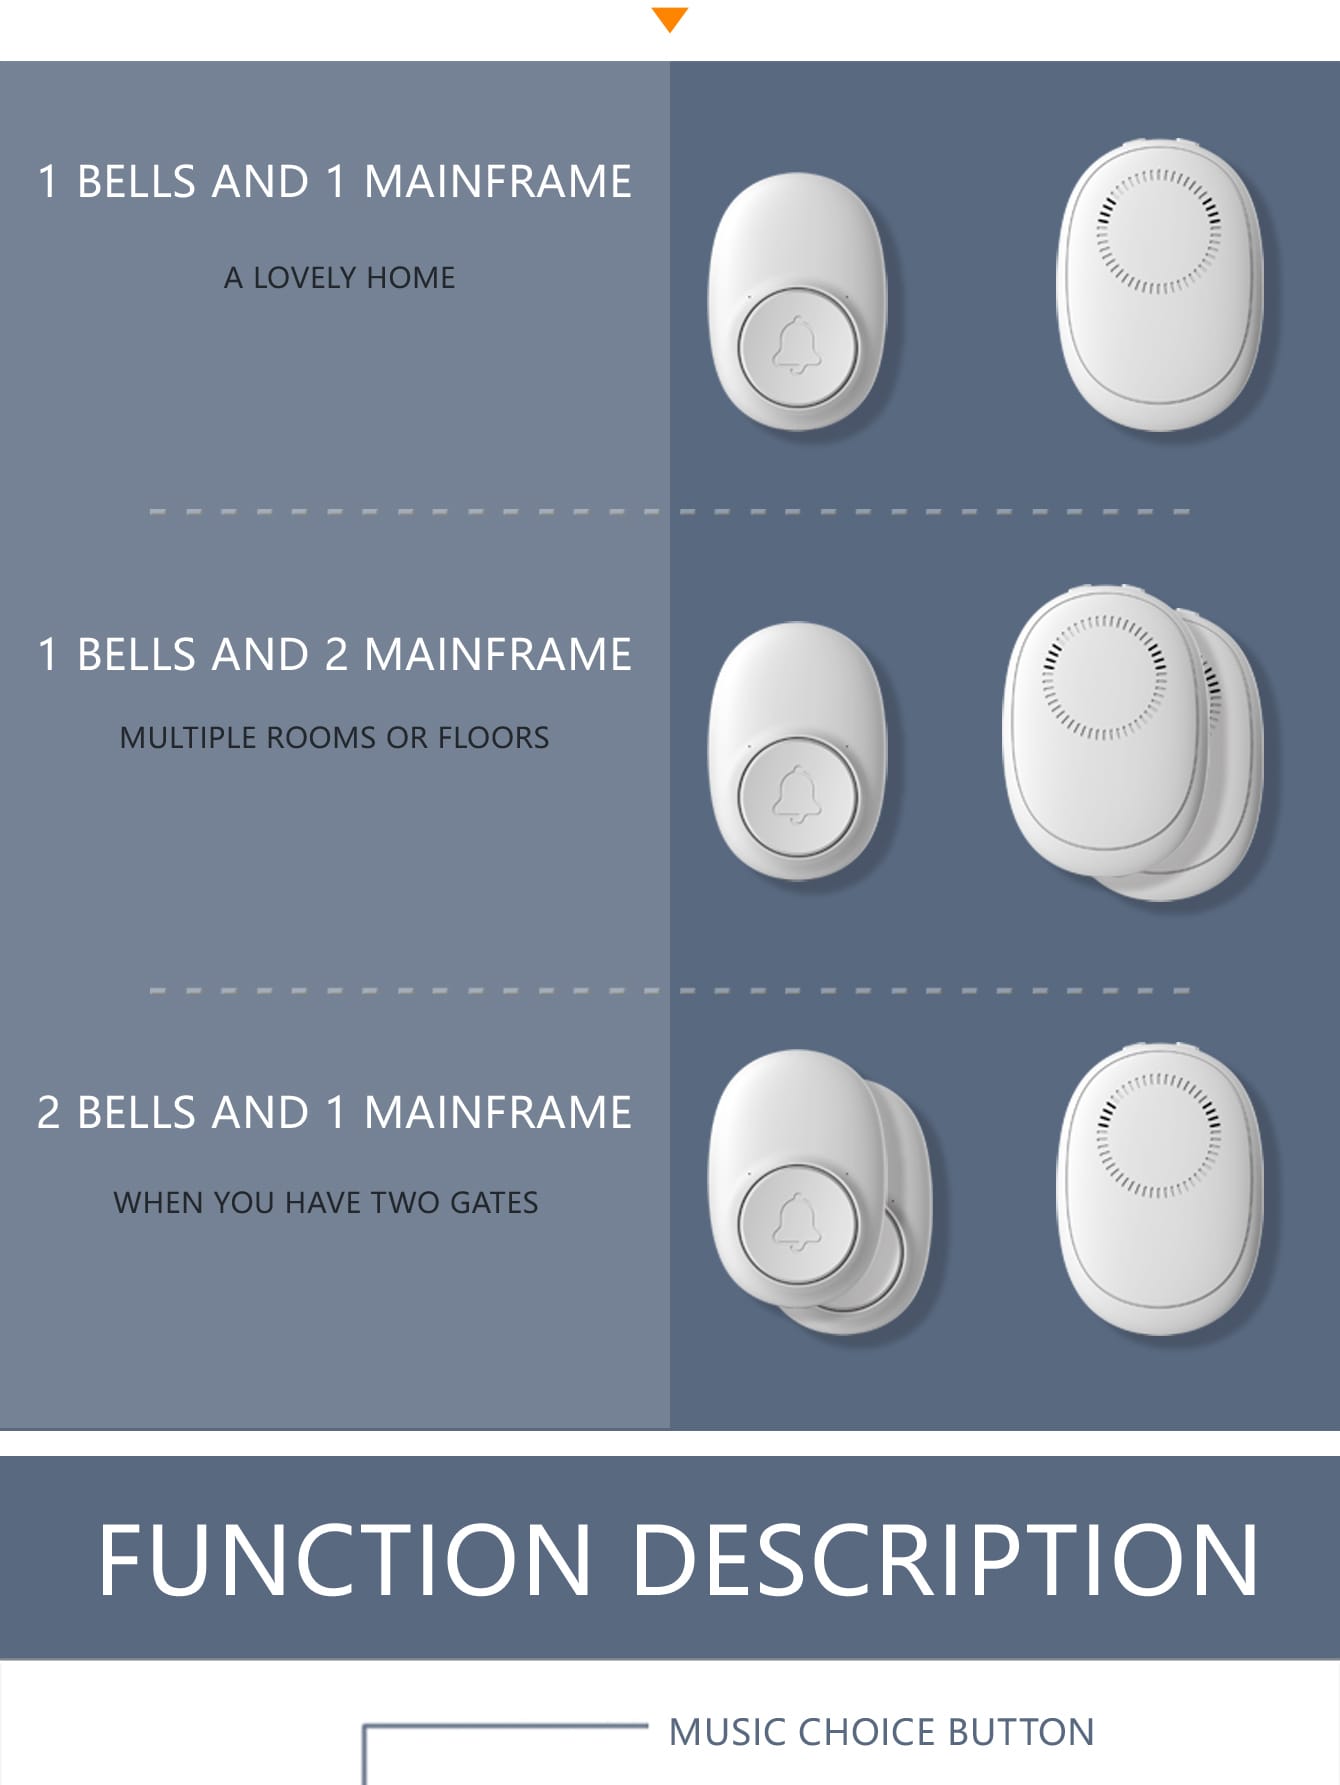 Wireless Intelligent Doorbell With Remote Control Button And Waterproof Electronic Receiver, Including 1 Transmitter, 1 Receiver, 1 Battery, 1 User Manual, Double-sided Tape And 2 Screws, Suitable For Uk/us/eu Standards, Ideal For Elderly. Sleek--9